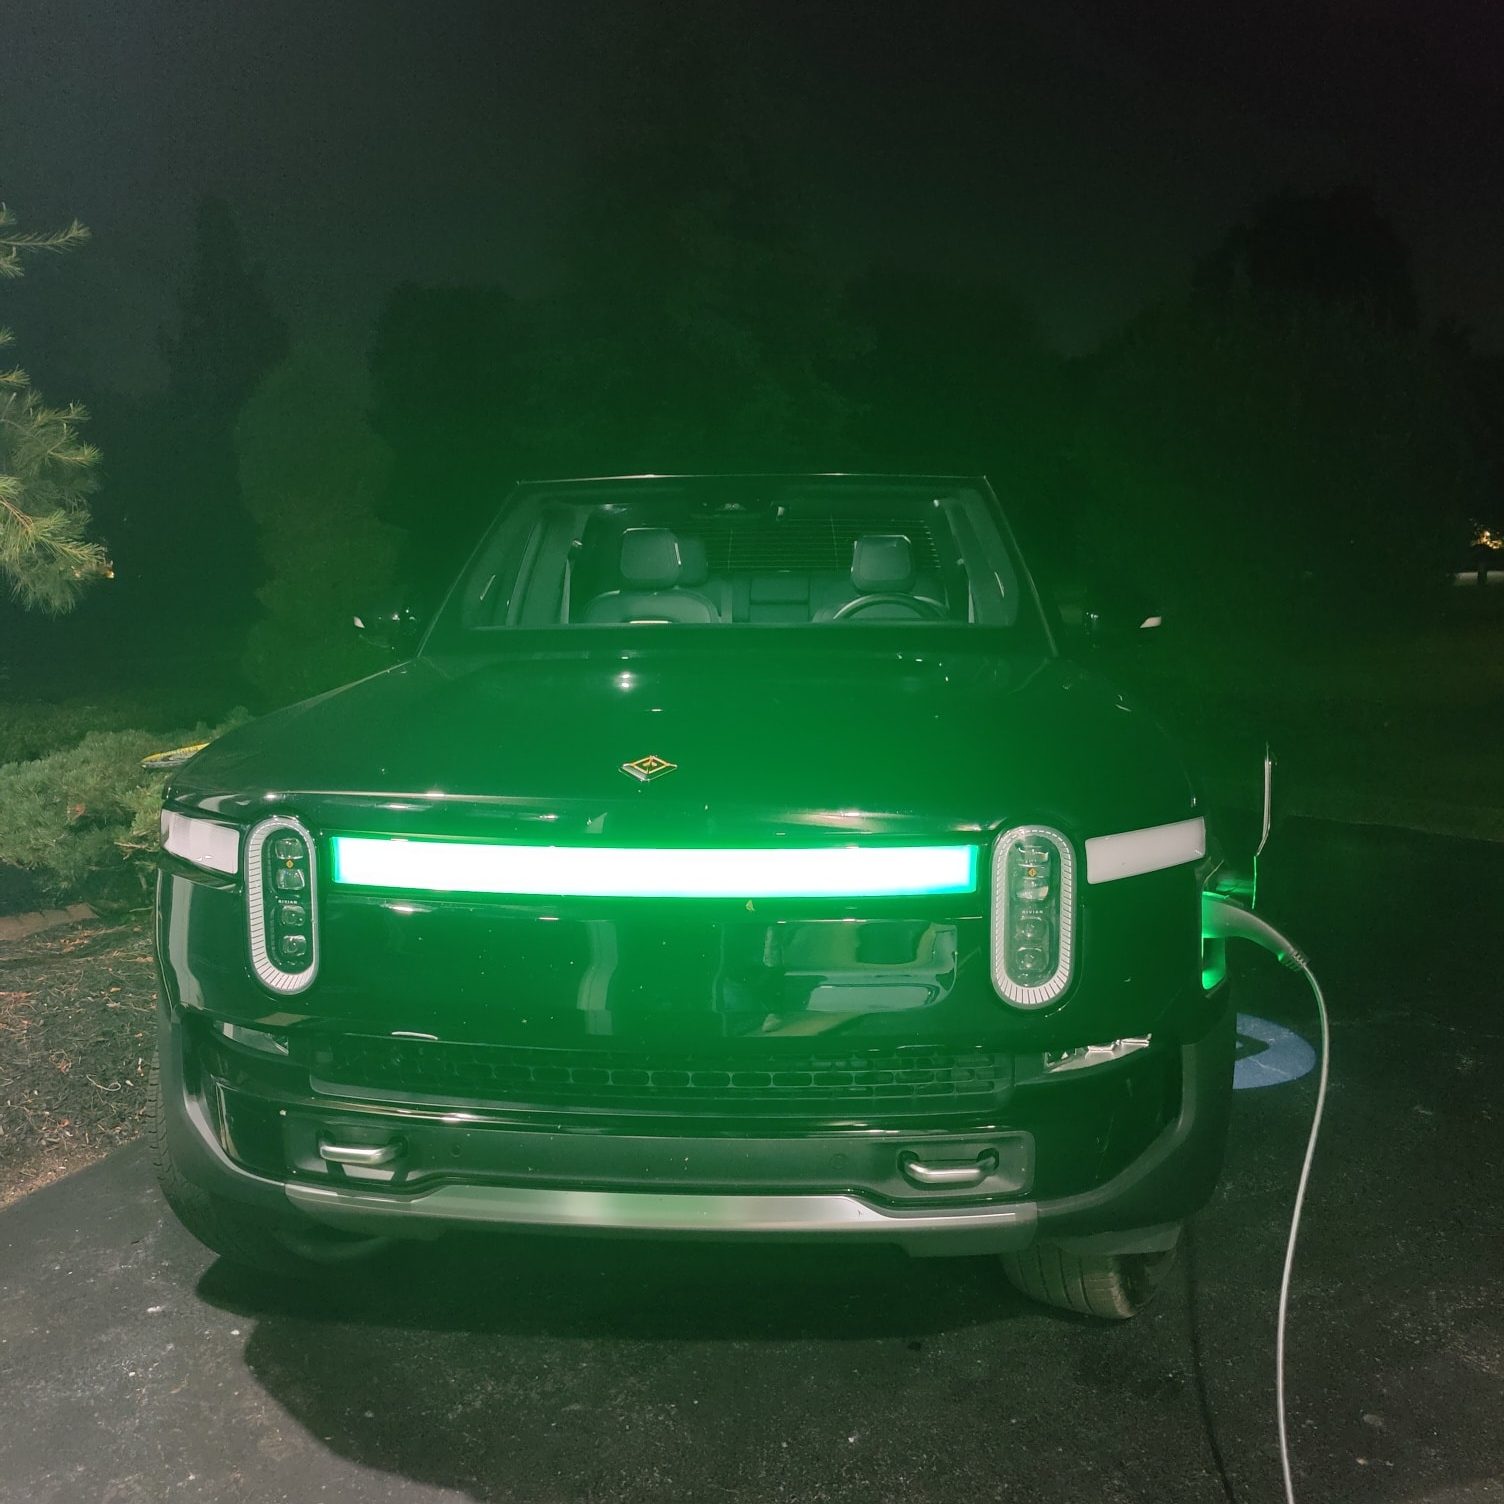 An electric vehicle, plugged in anc charging with a green light glowing in the front